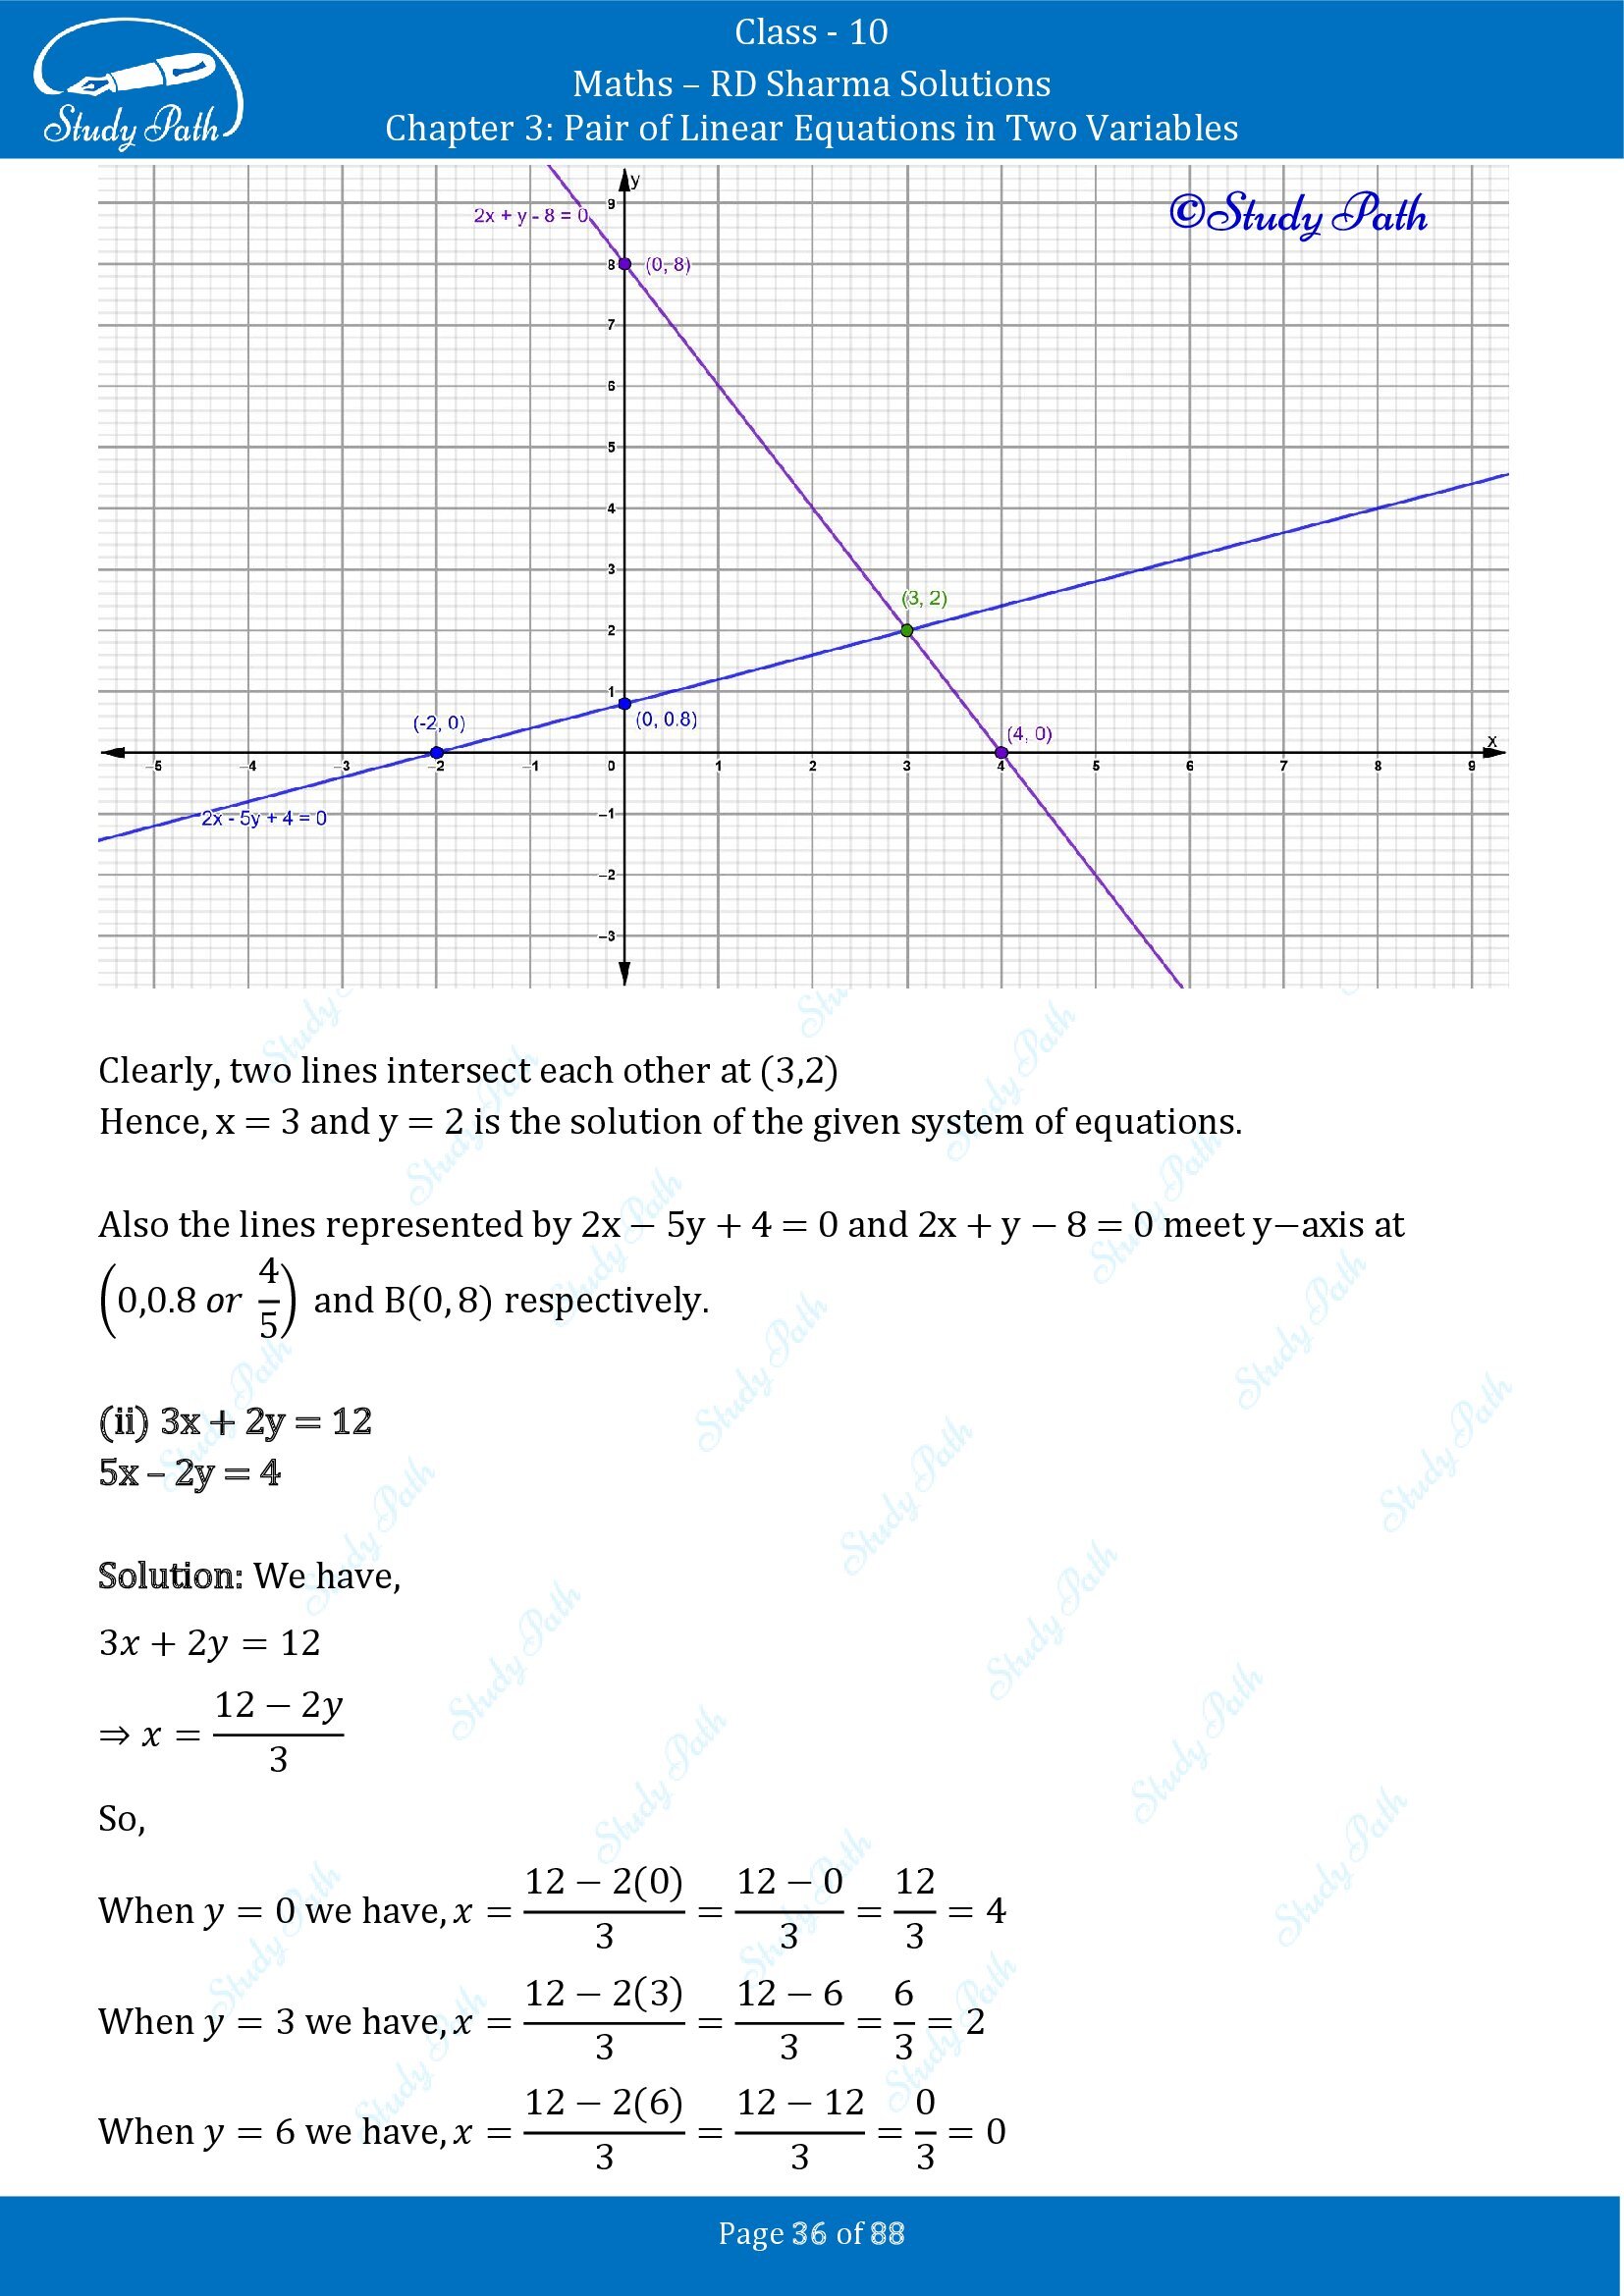 RD Sharma Solutions Class 10 Chapter 3 Pair of Linear Equations in Two Variables Exercise 3.2 00036